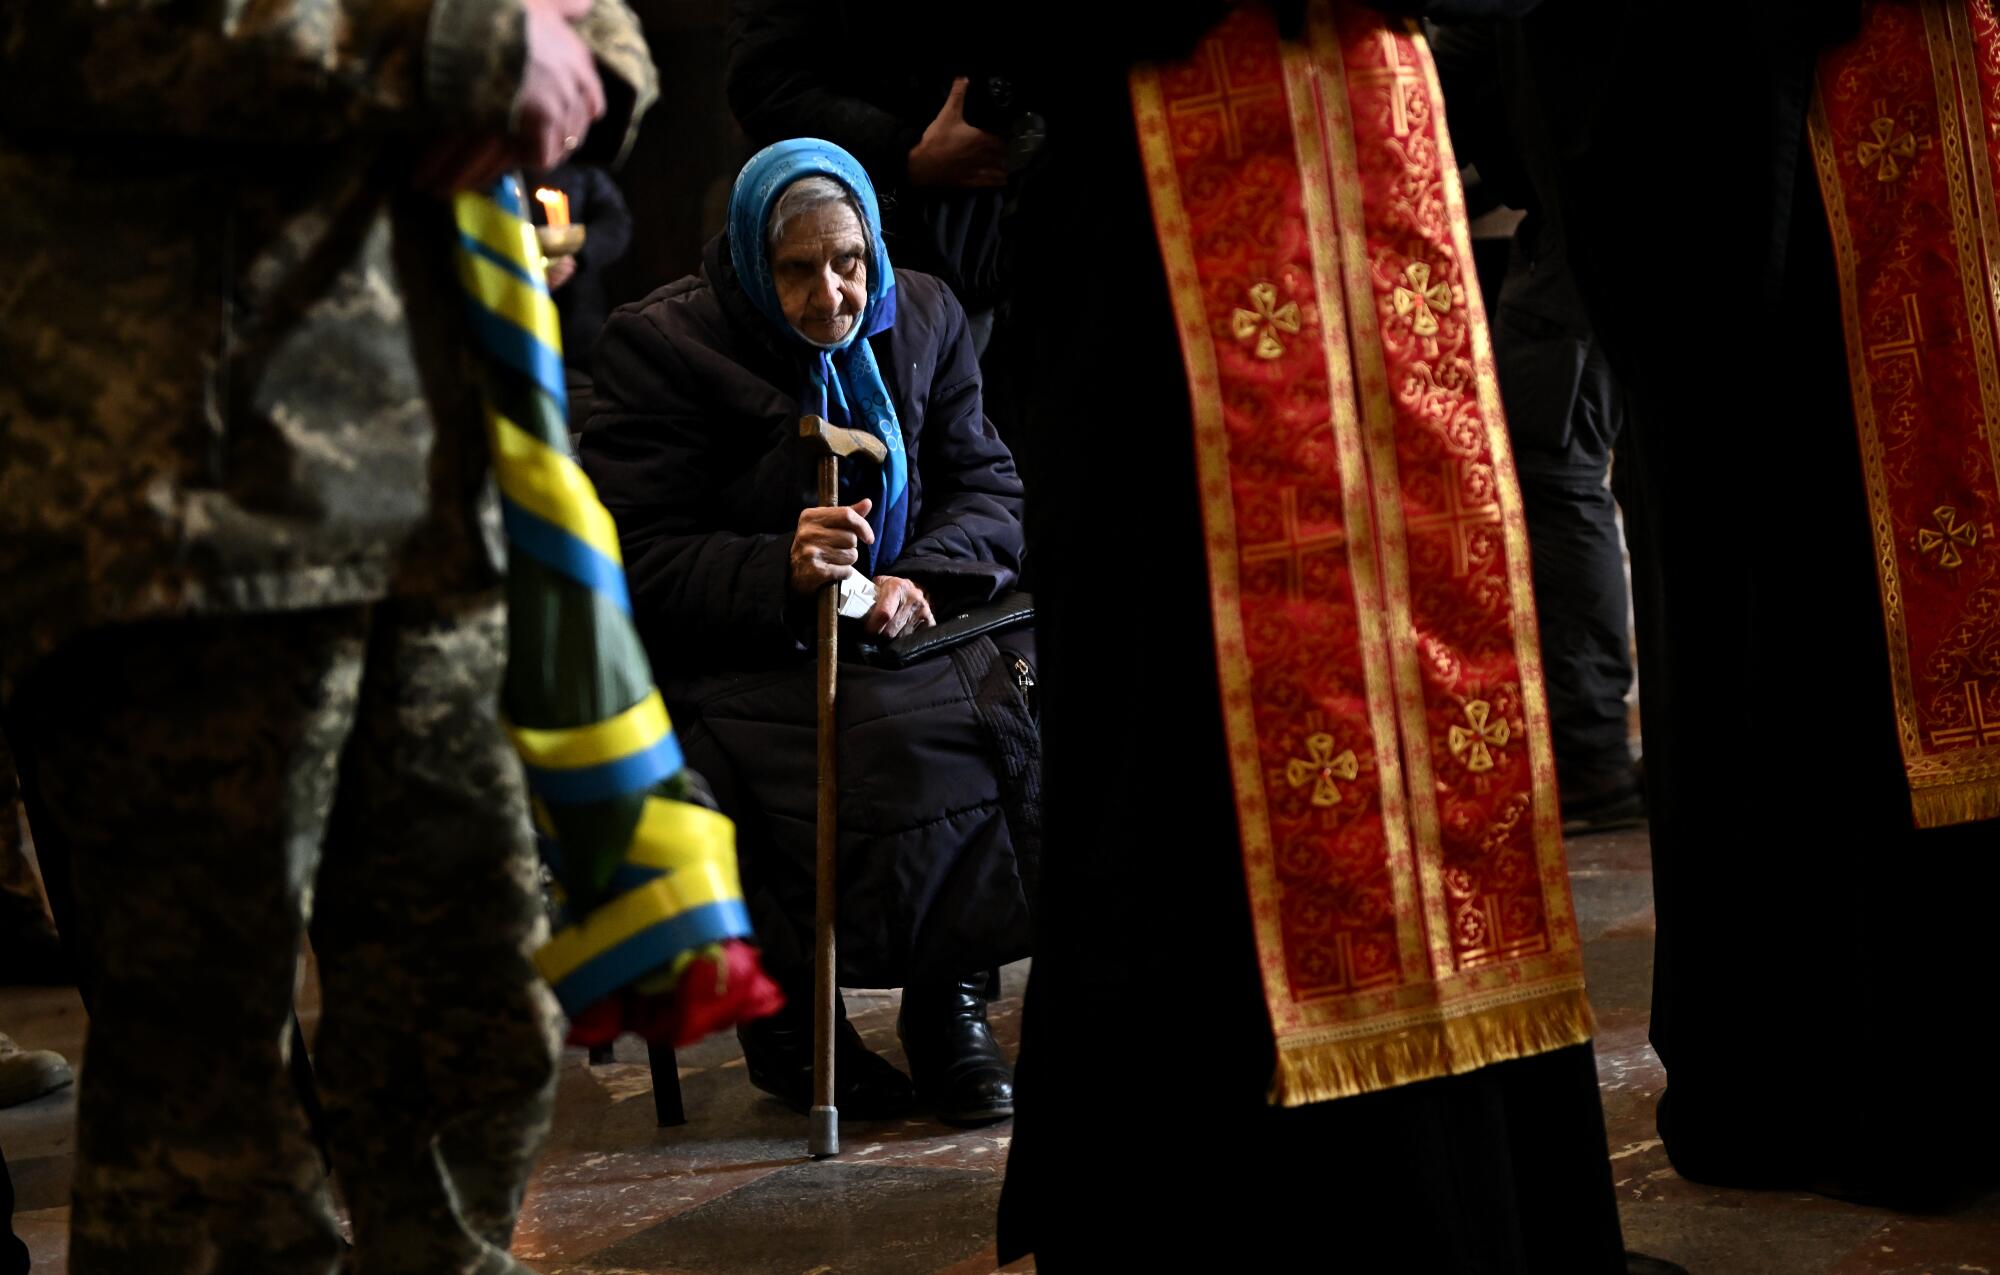 A woman pays her respects during a funeral service for Ukrainian soldier Ivan Skrypnyk in Lviv on Thursday.